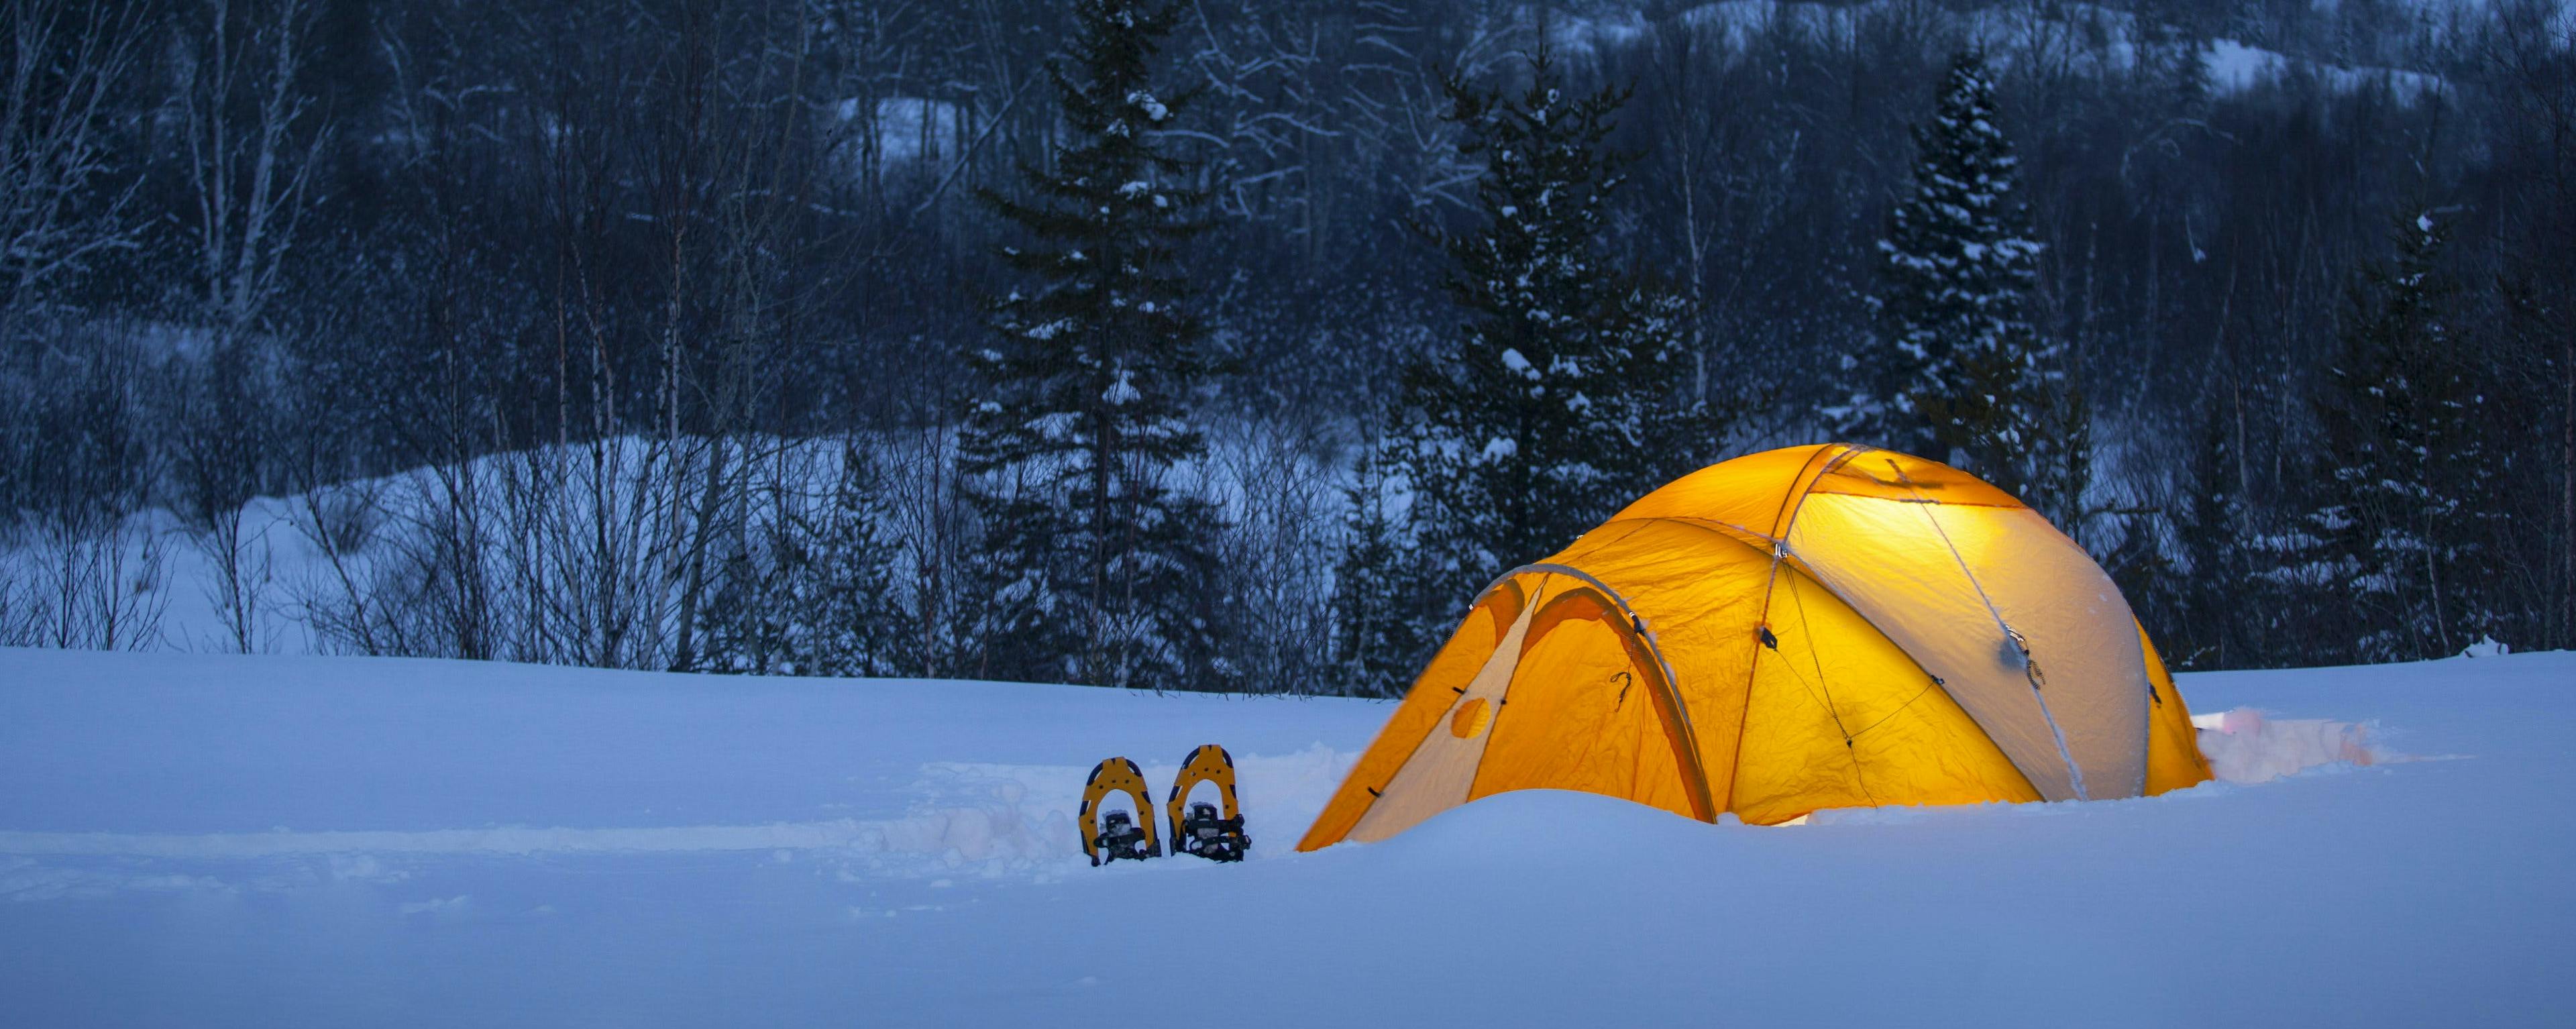 Winter camping tips: 26 things beginners should know